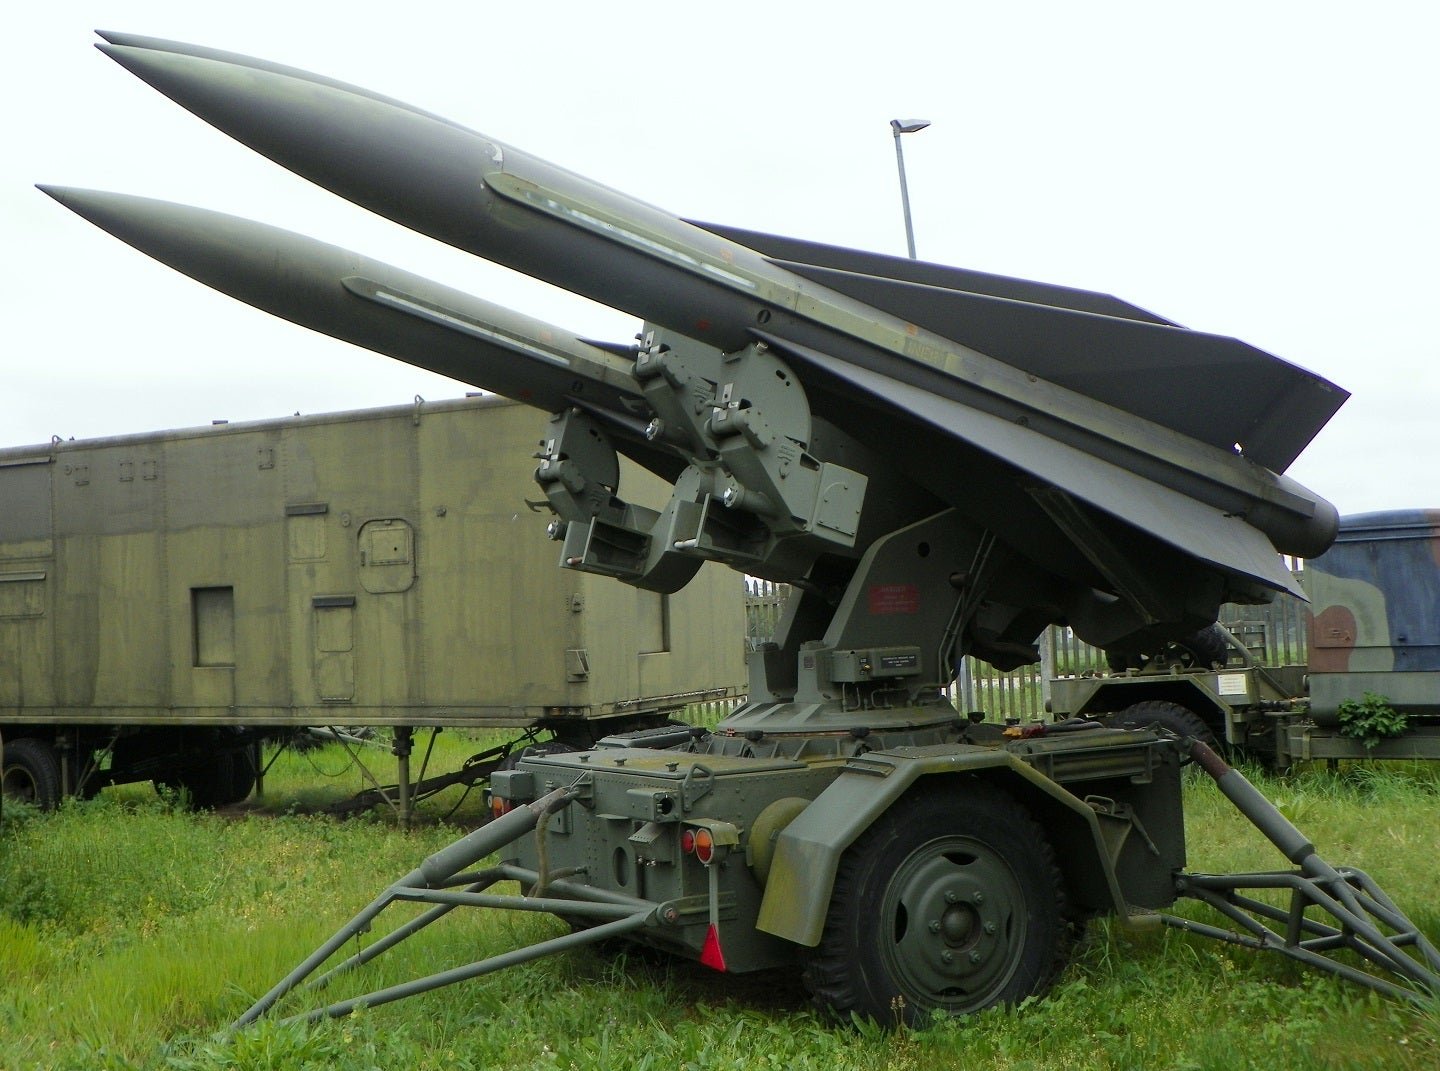 Ukraine reinforces against Russian threats with HAWK missile system upgrade